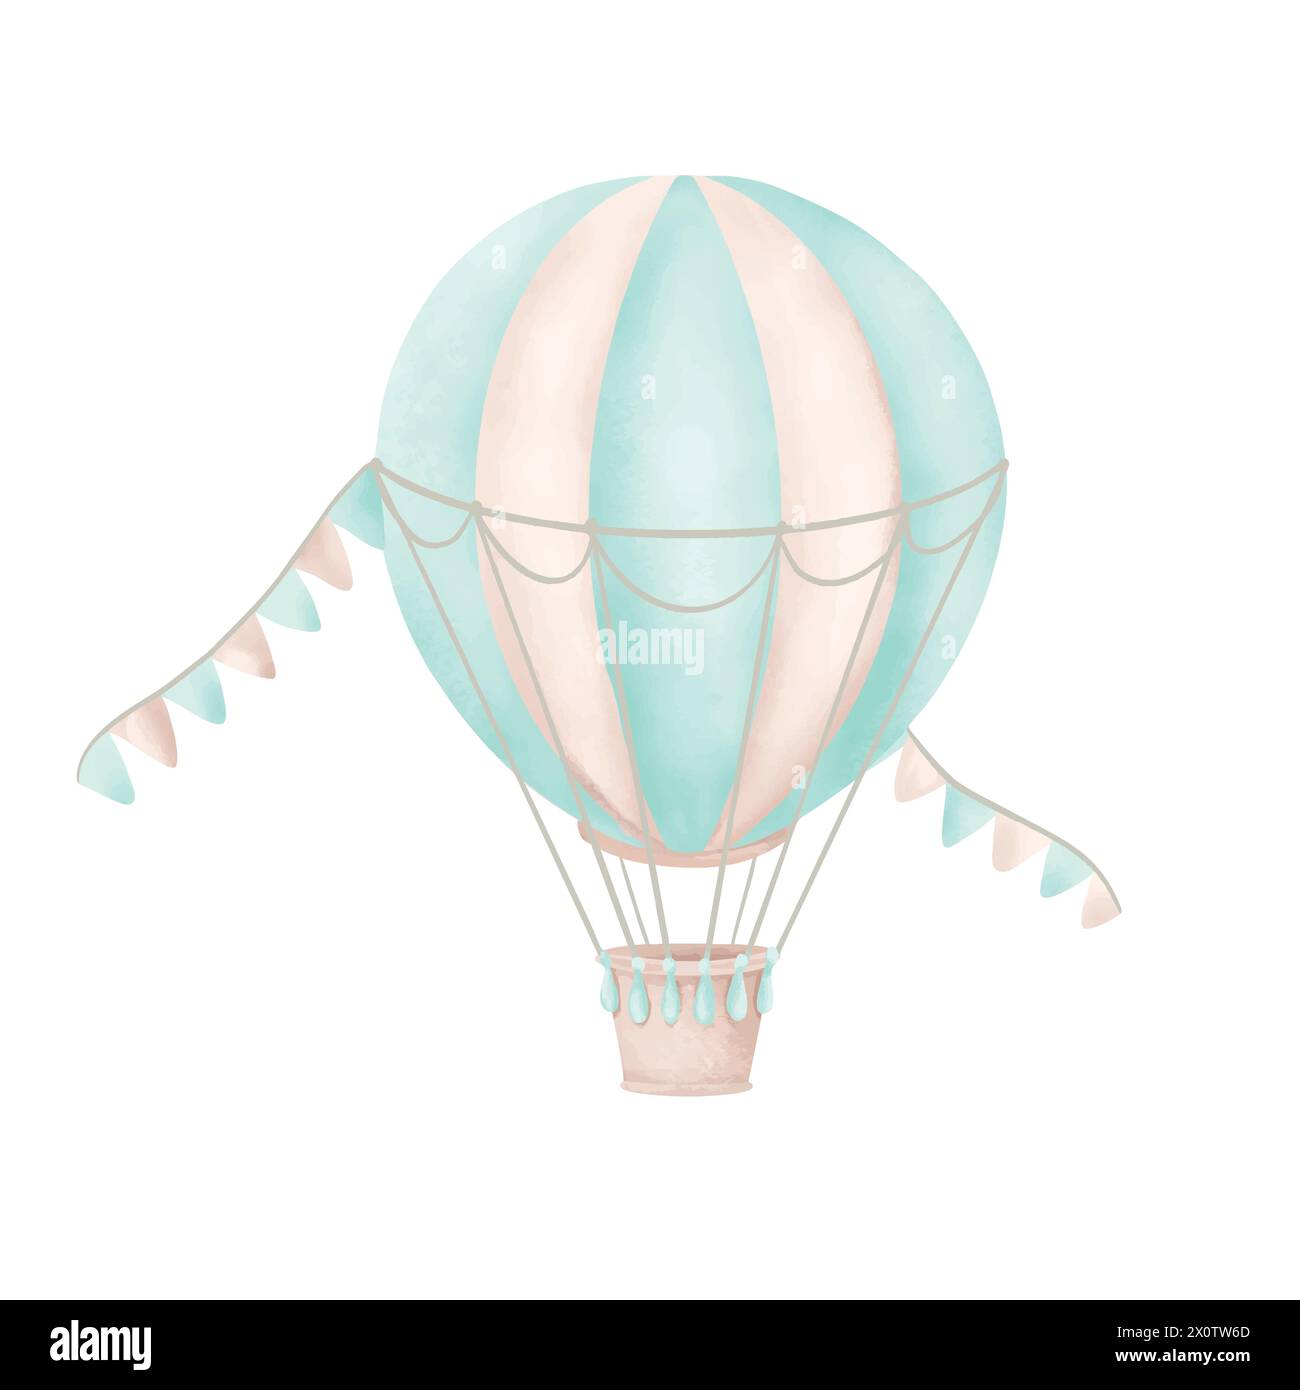 Air balloon, flags, watercolor. Hand drawn vector illustration for cards, invitations, children room design. Vintage hot air balloon in cartoon style. Stock Vector